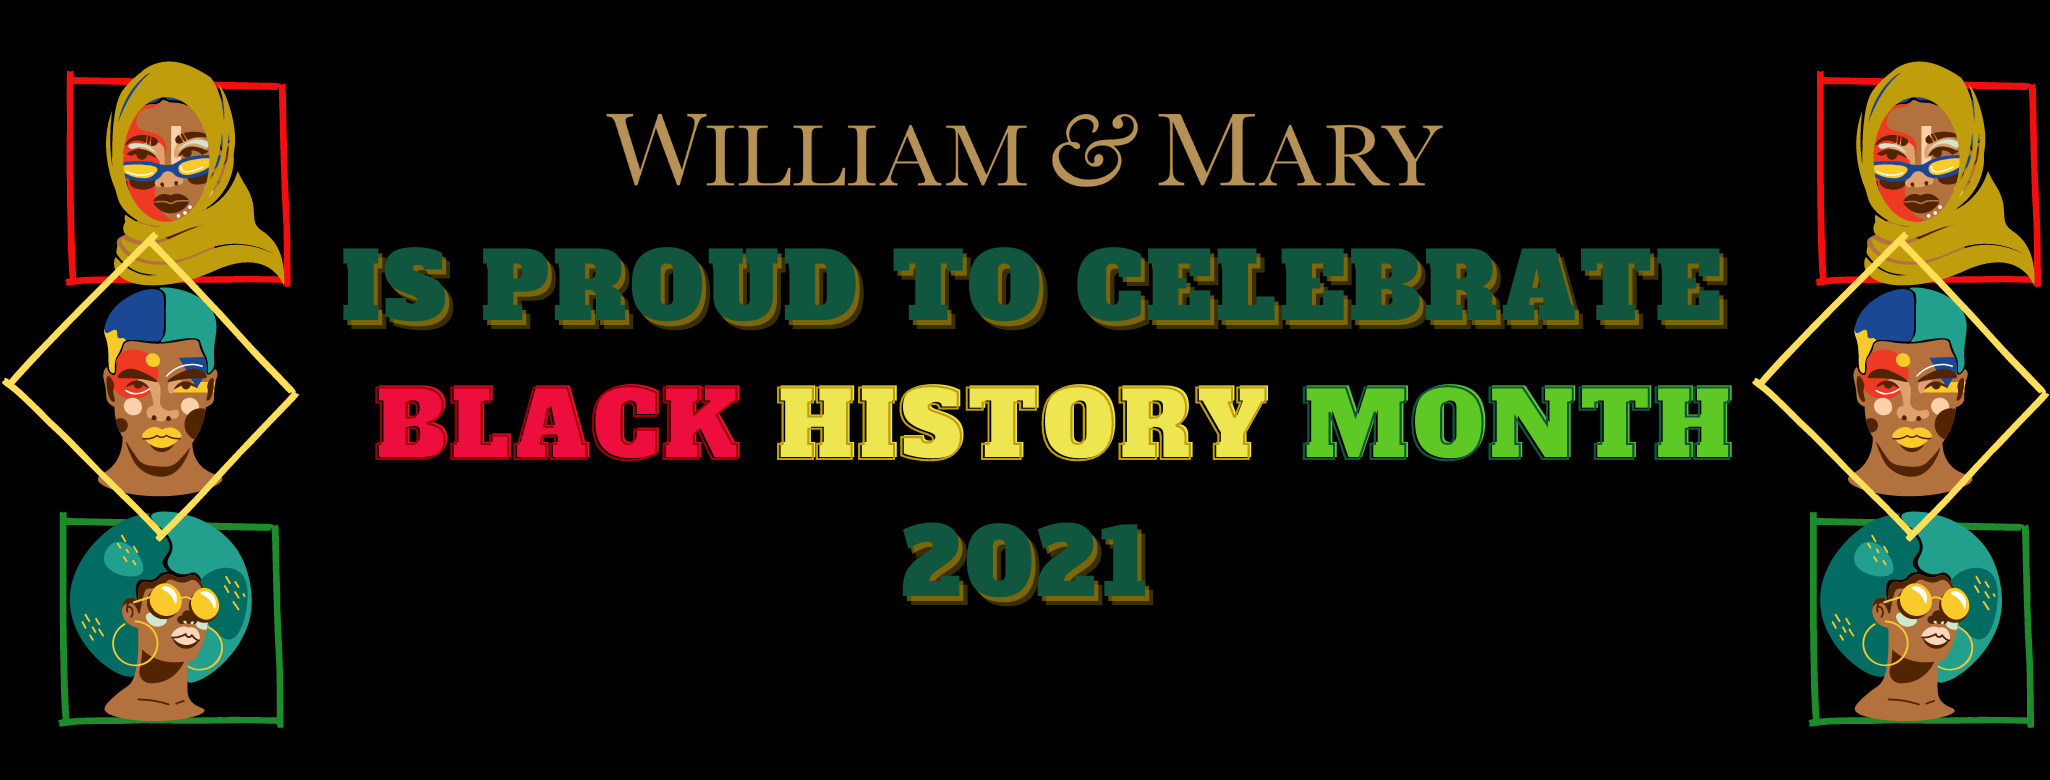 wm-is-proud-to-celebrate-bhm.png